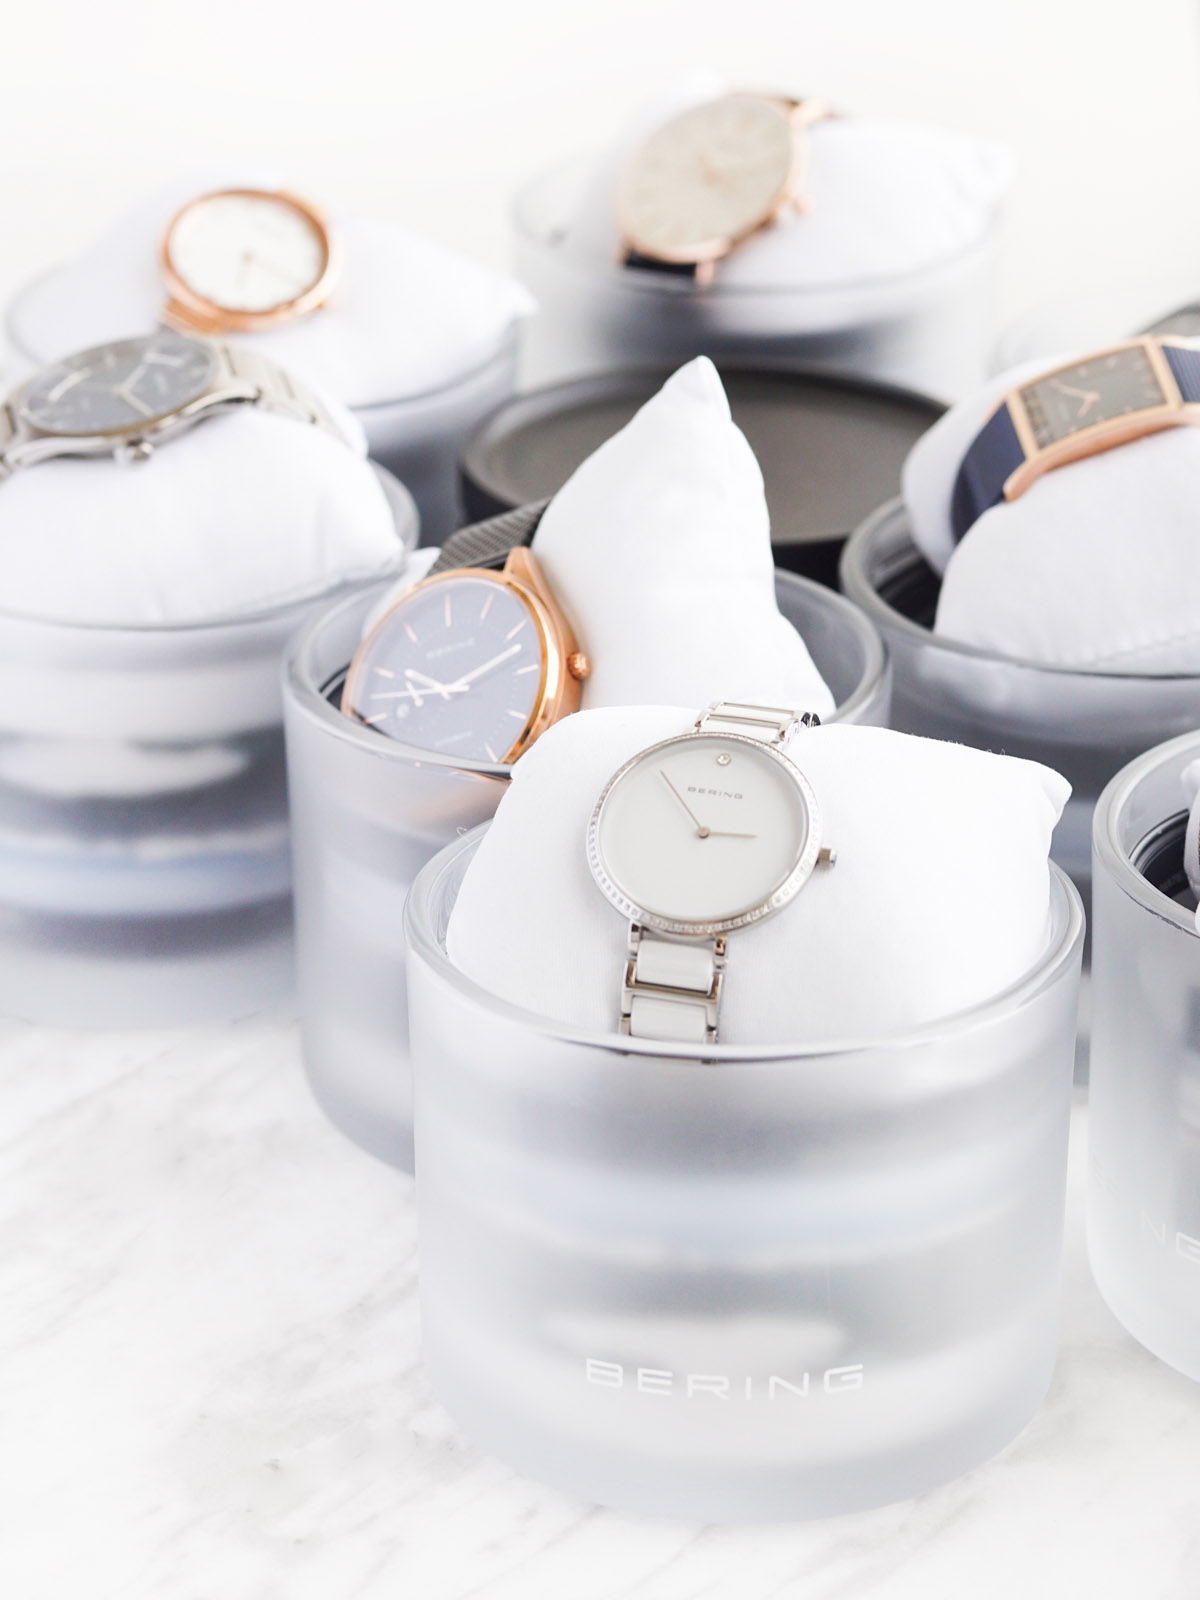 Bering watches in frosted glass case with pillows